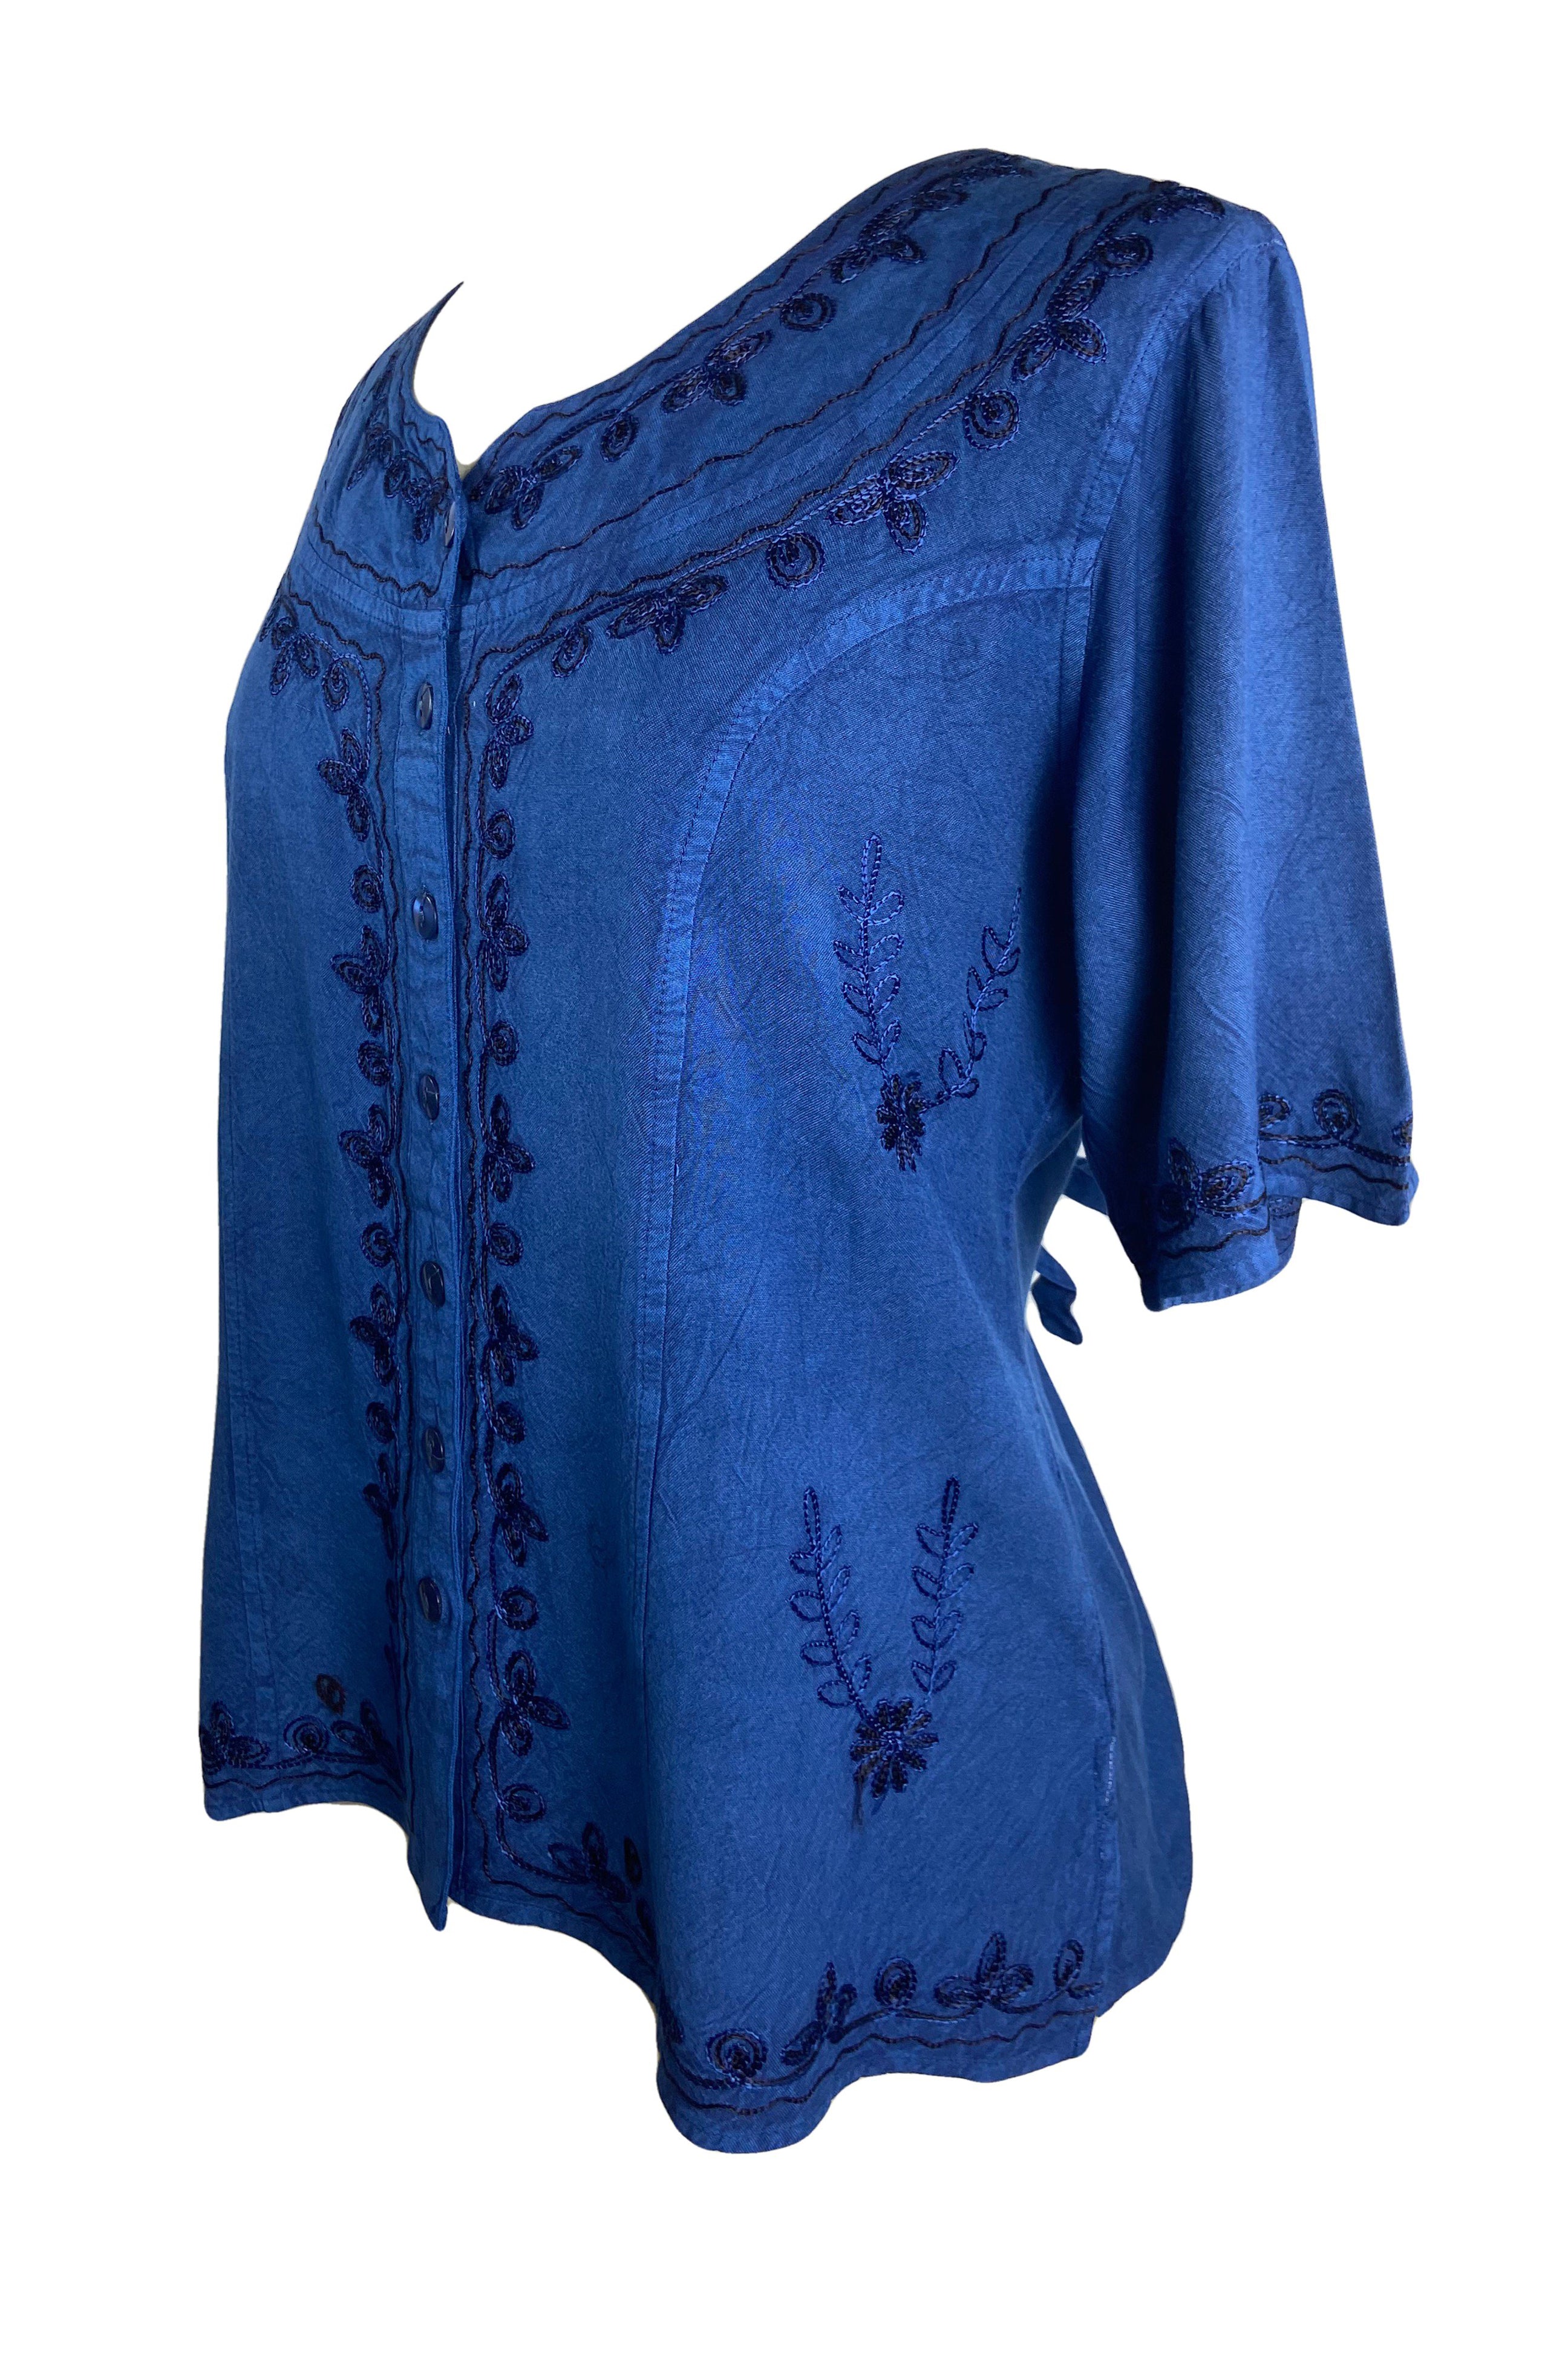 109 B Gypsy Medieval Diamond Neck Embroidered Top Blouse – Agan Traders